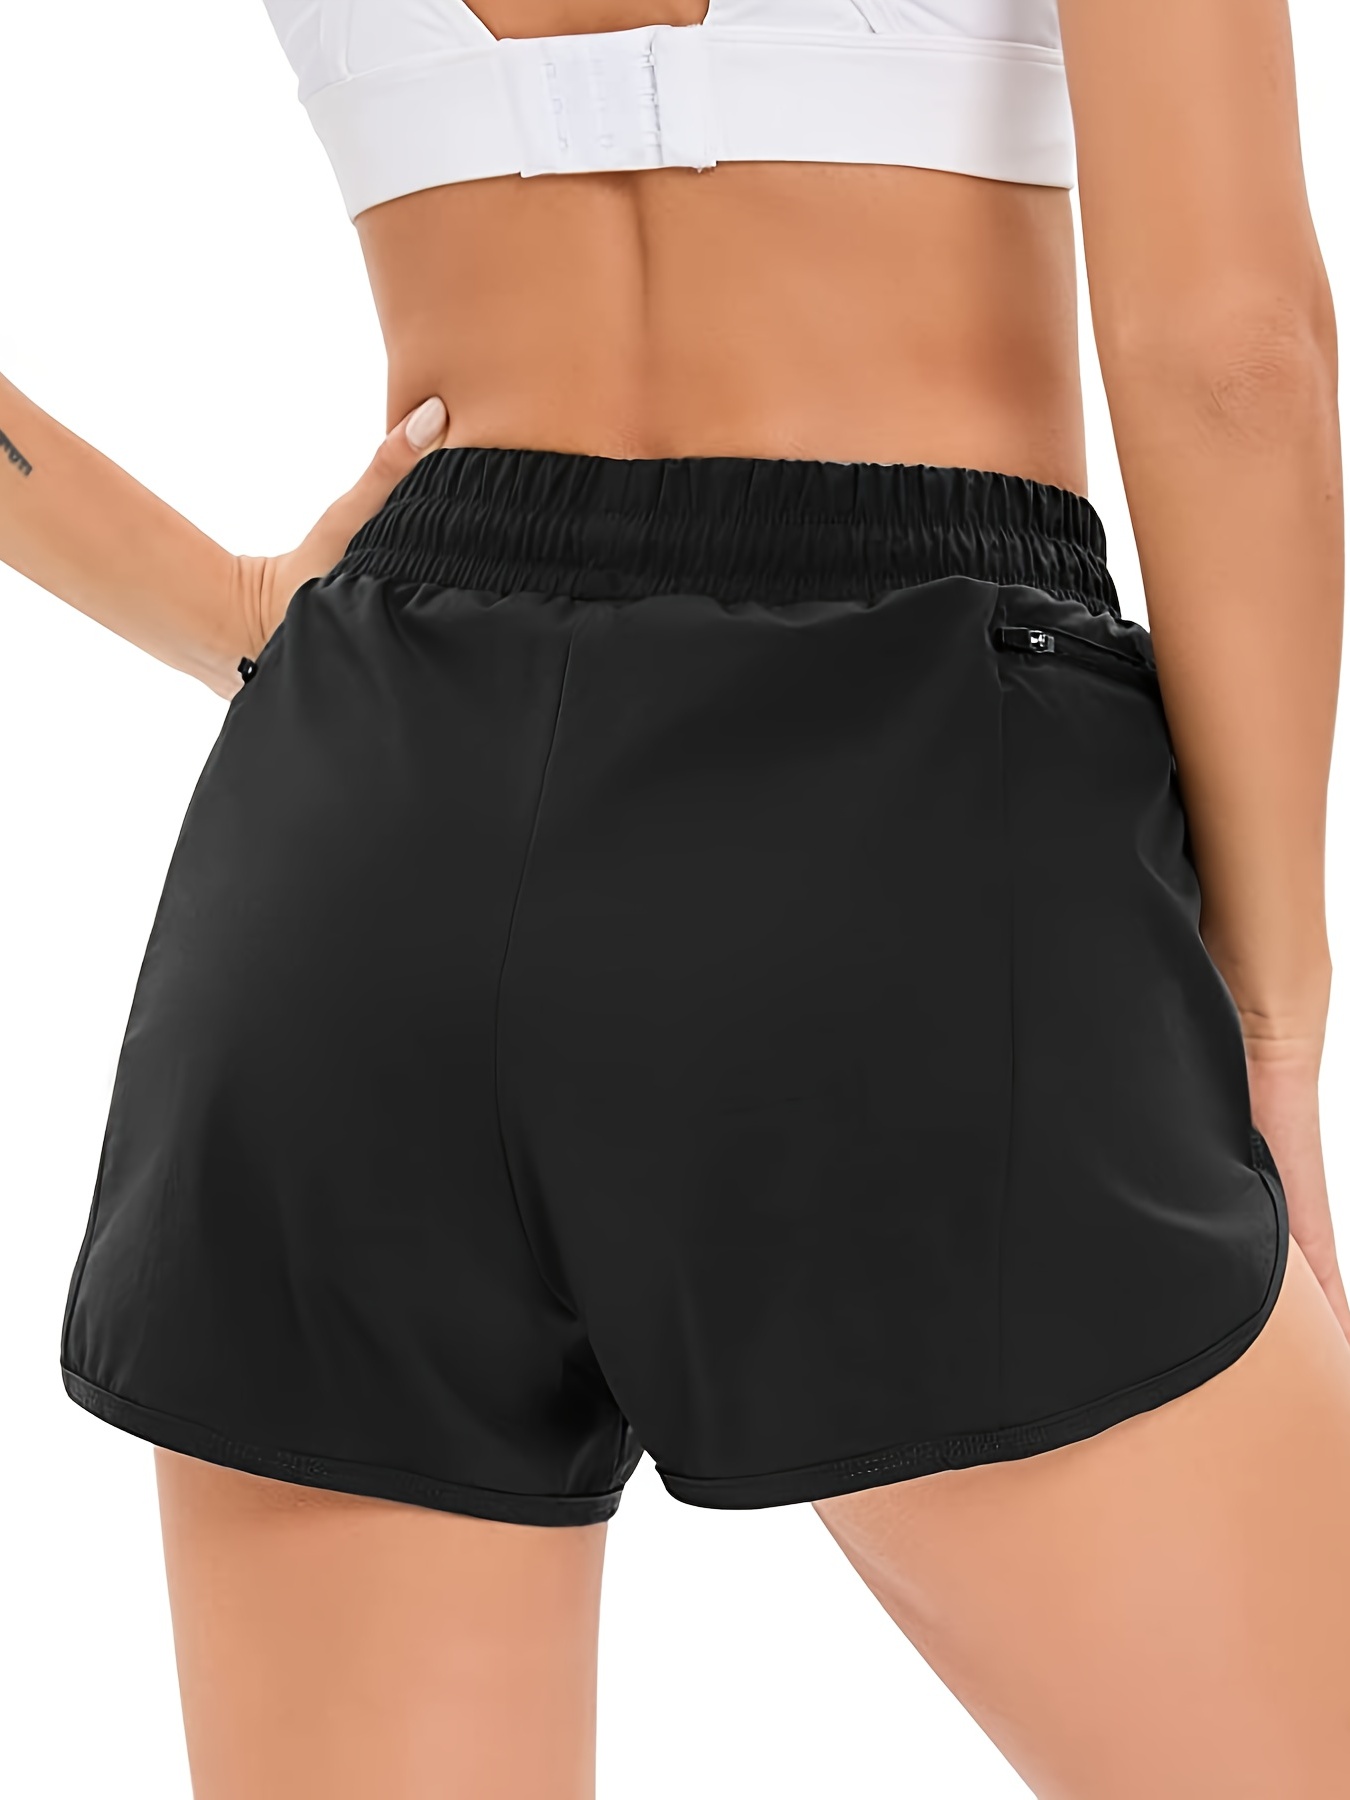 Stylish and Comfortable Women's Gym Shorts